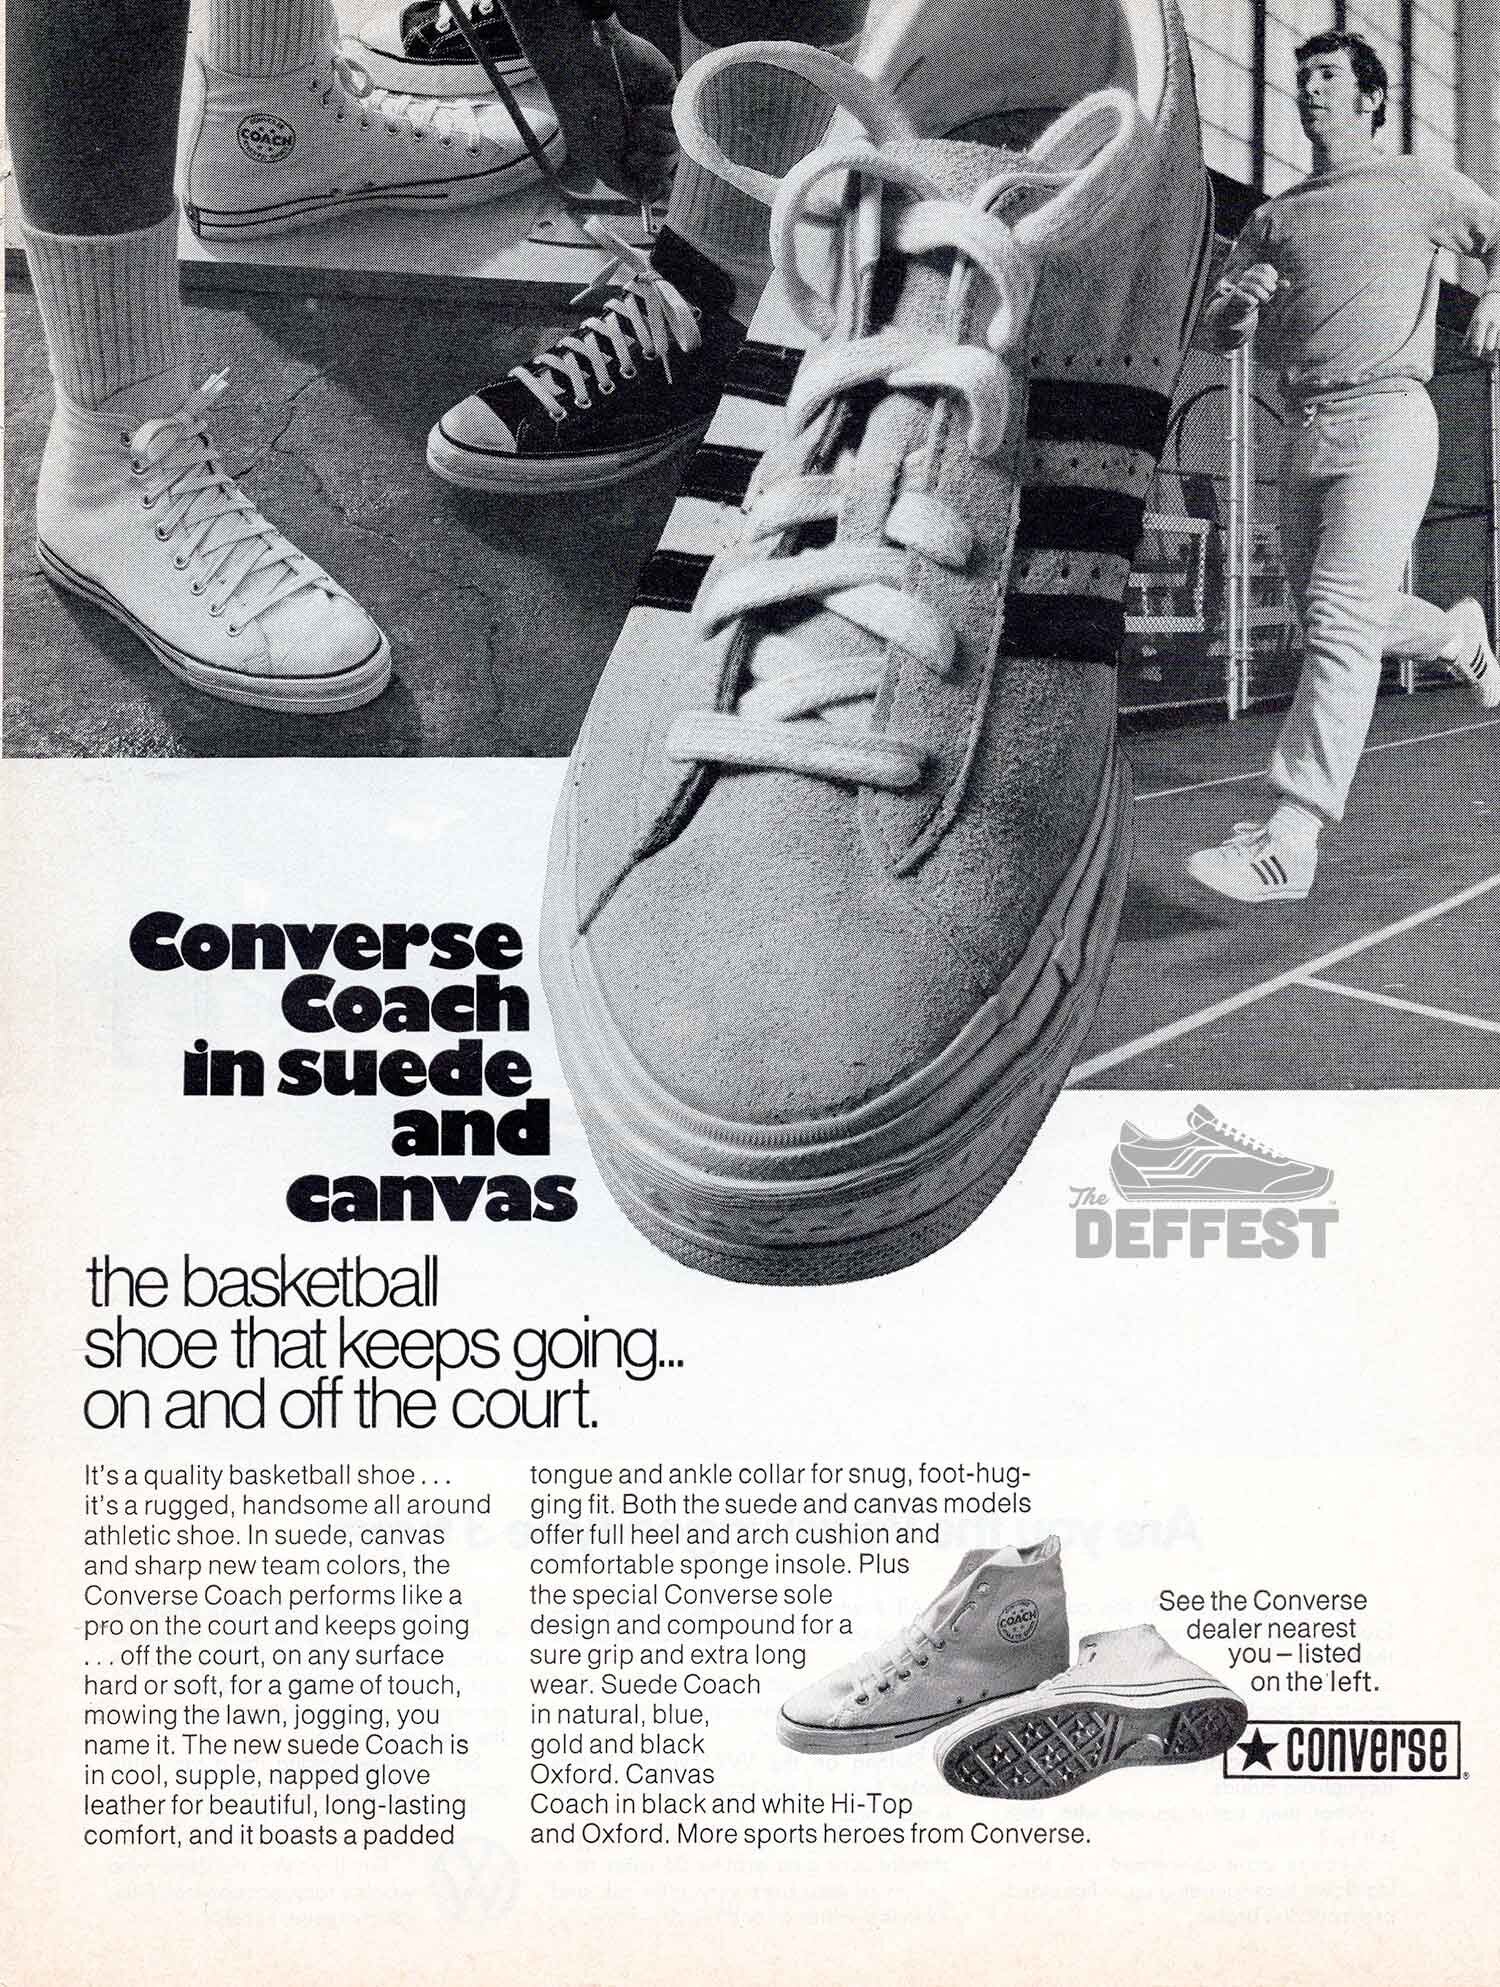 converse comfortable for walking